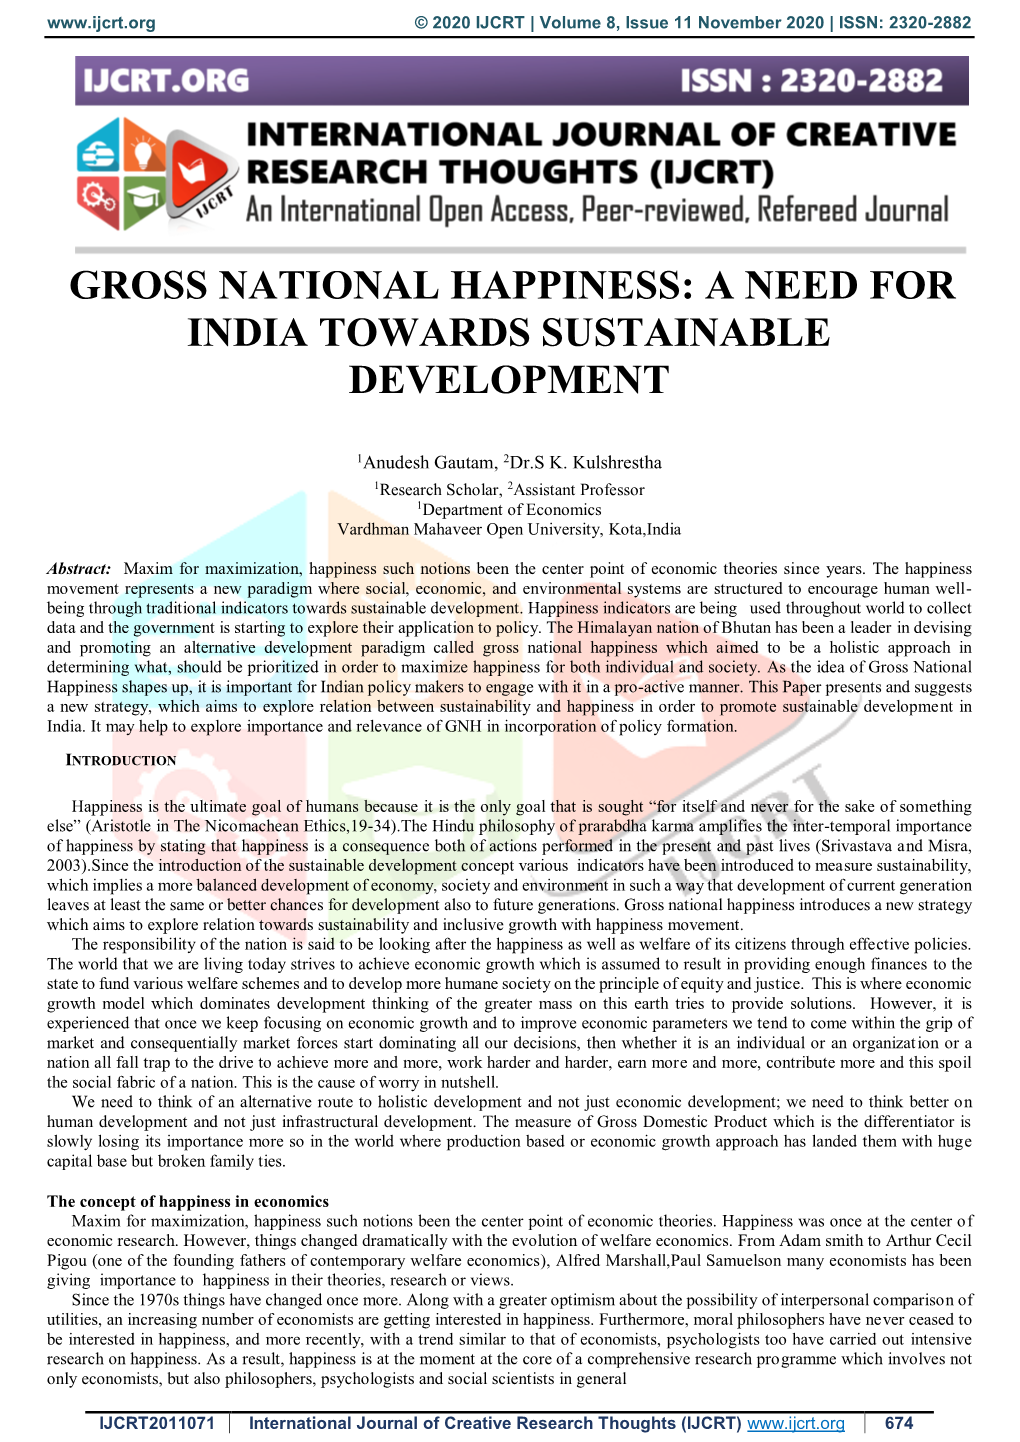 Gross National Happiness: a Need for India Towards Sustainable Development